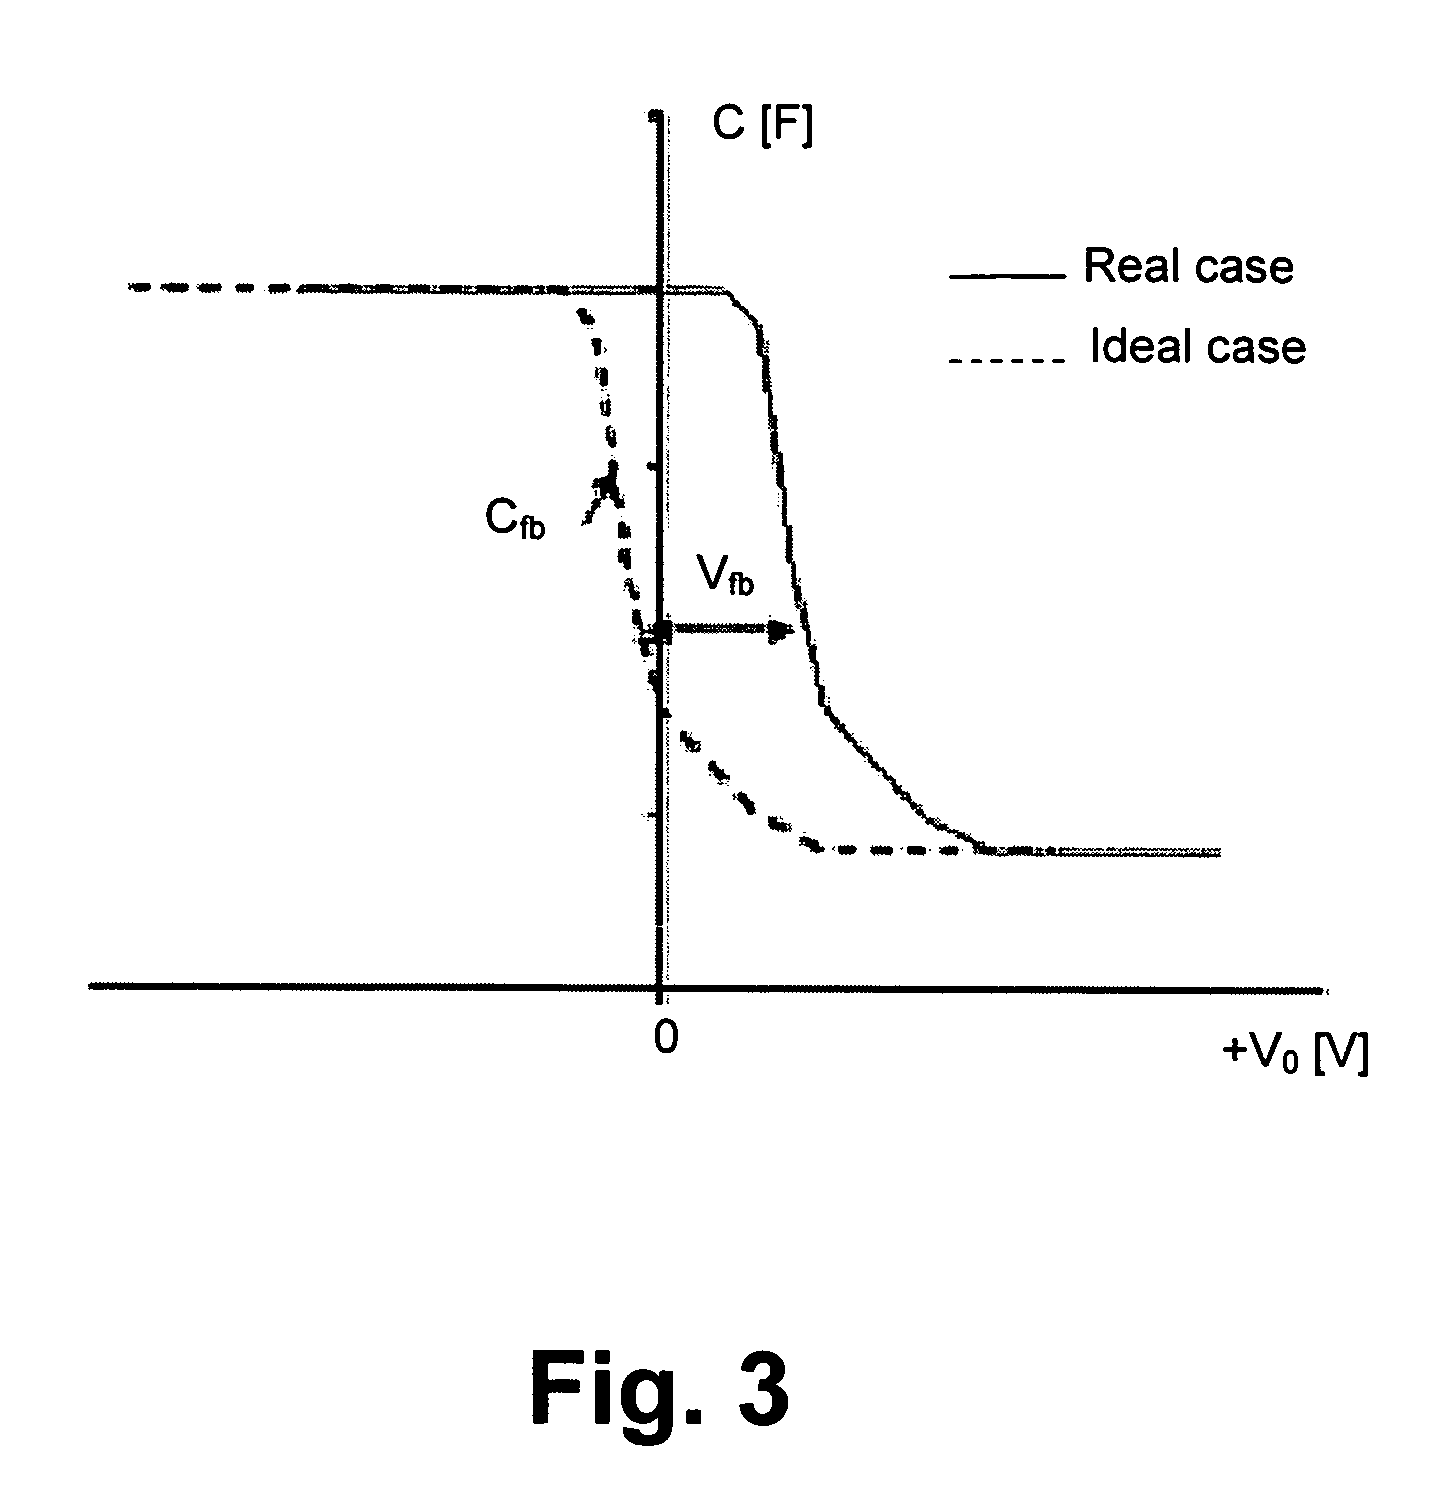 Method for backside surface passivation of solar cells and solar cells with such passivation